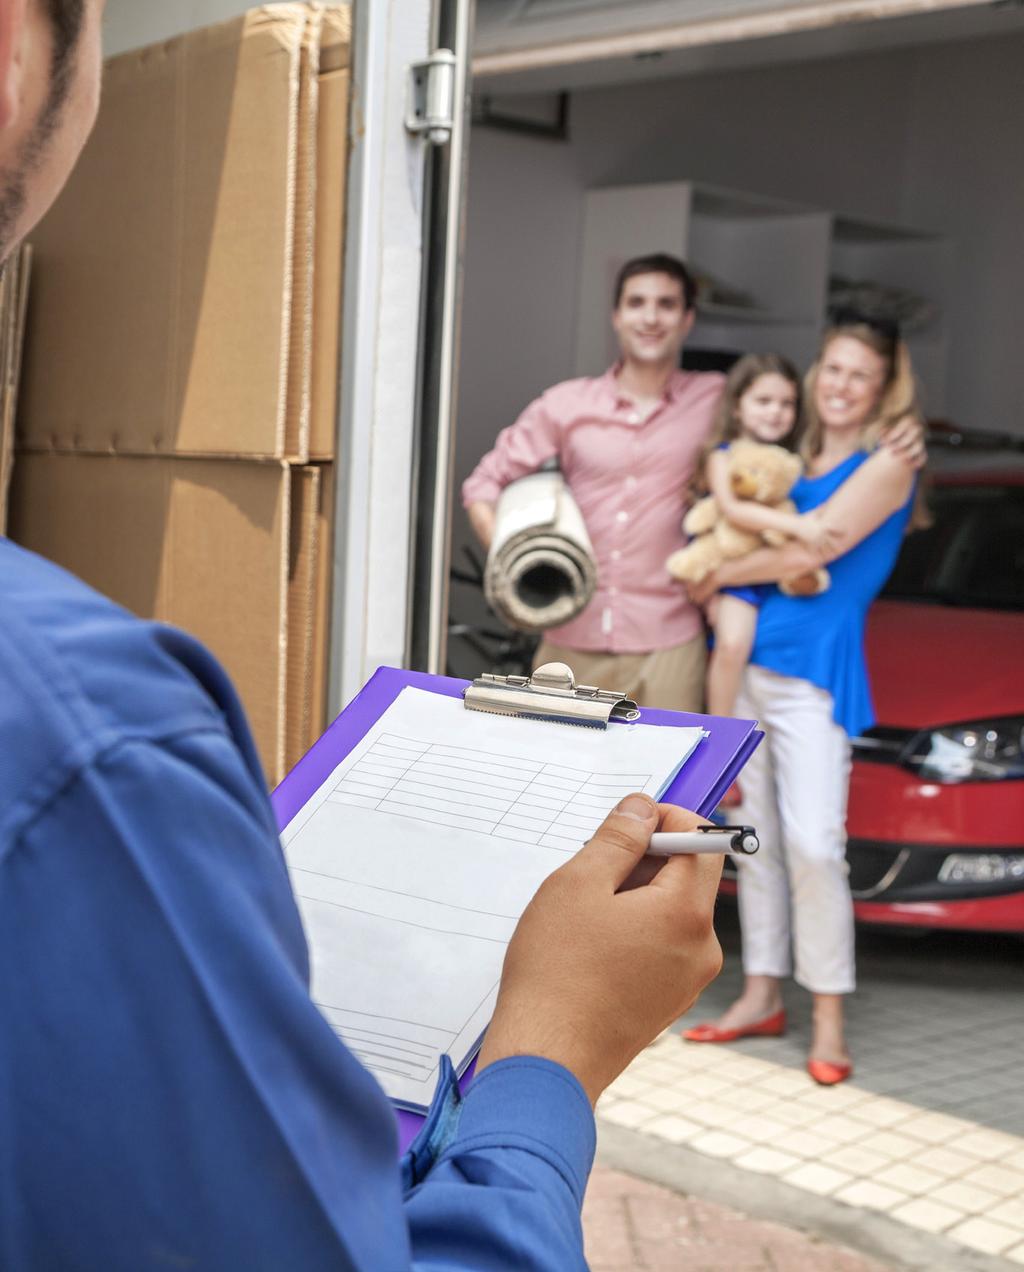 Expectations of Your Service Provider As mentioned earlier, after initial contact is made between your household goods moving partner and the transferee, the pre-move survey is scheduled.